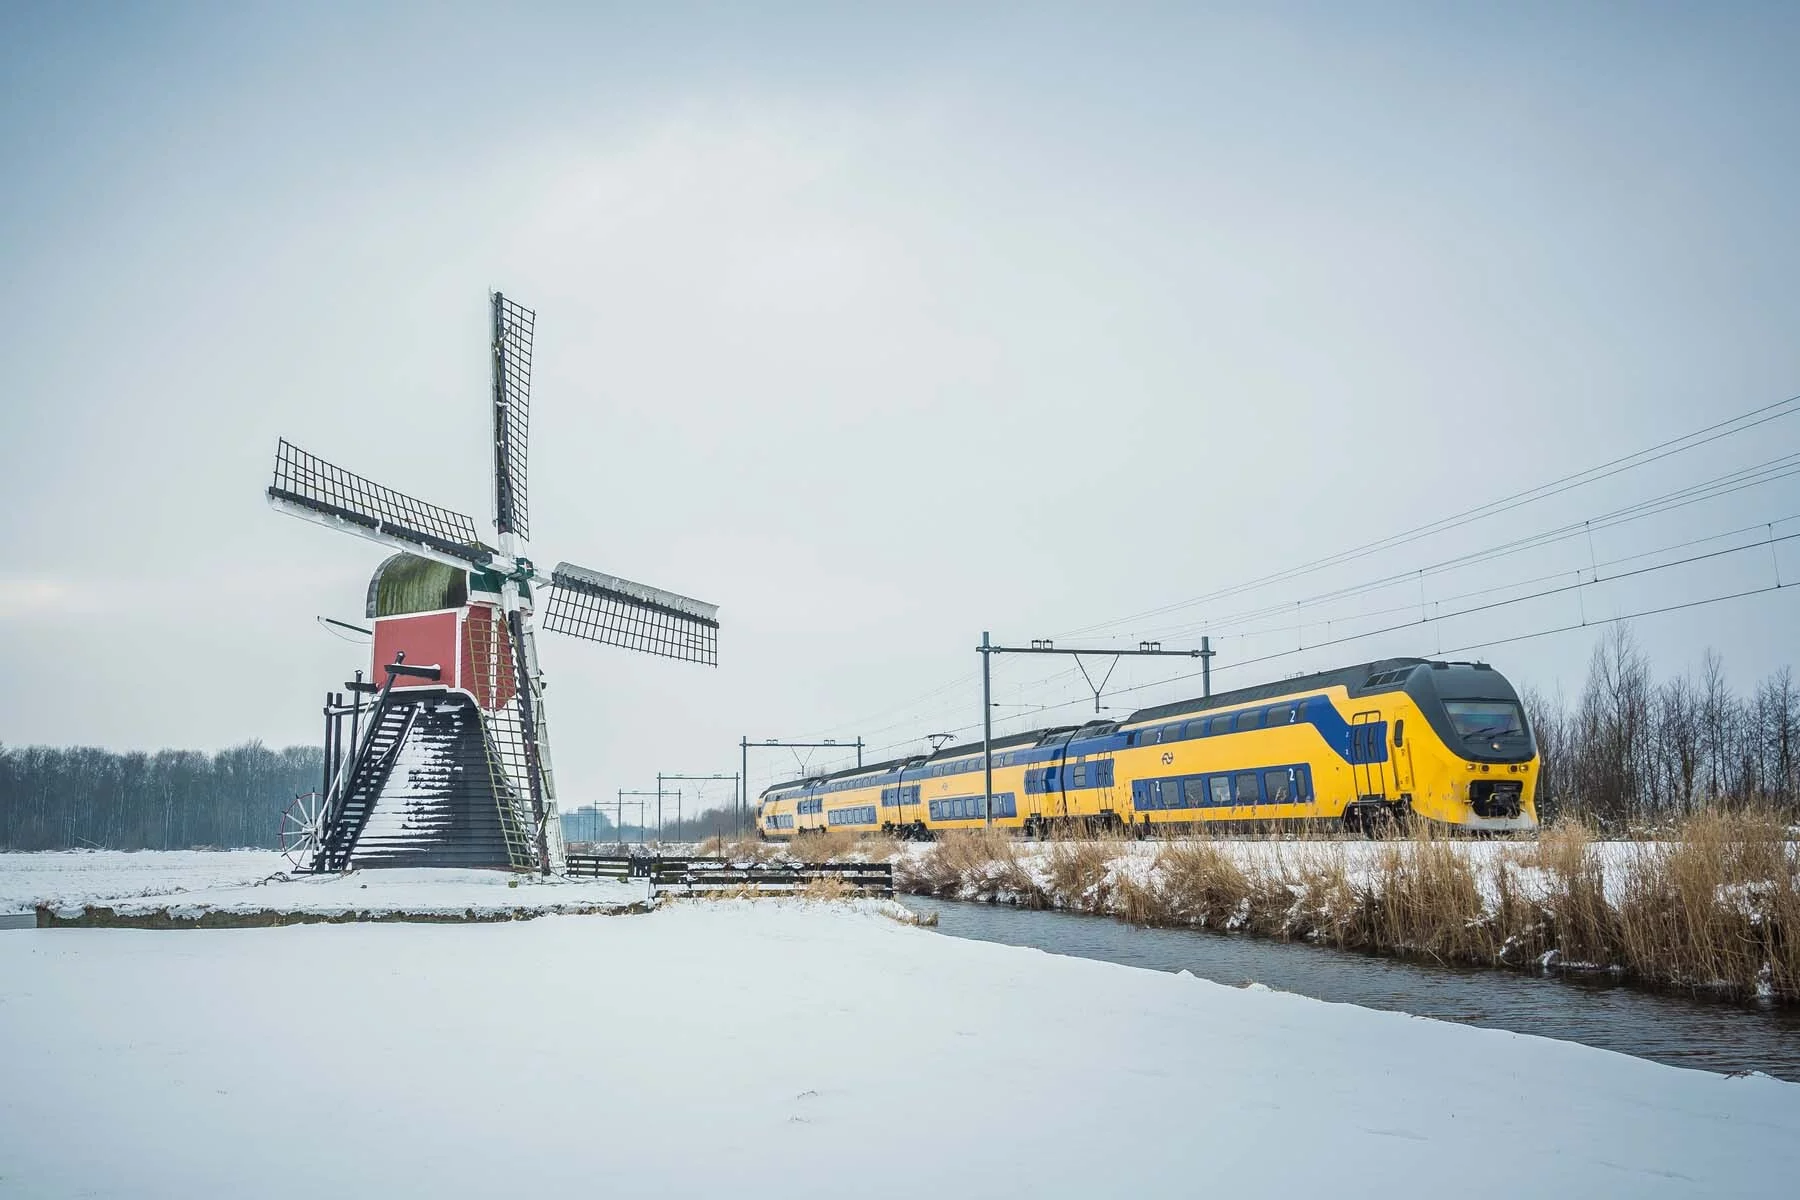 An NS Intercity train passing a windmill on a snowy day